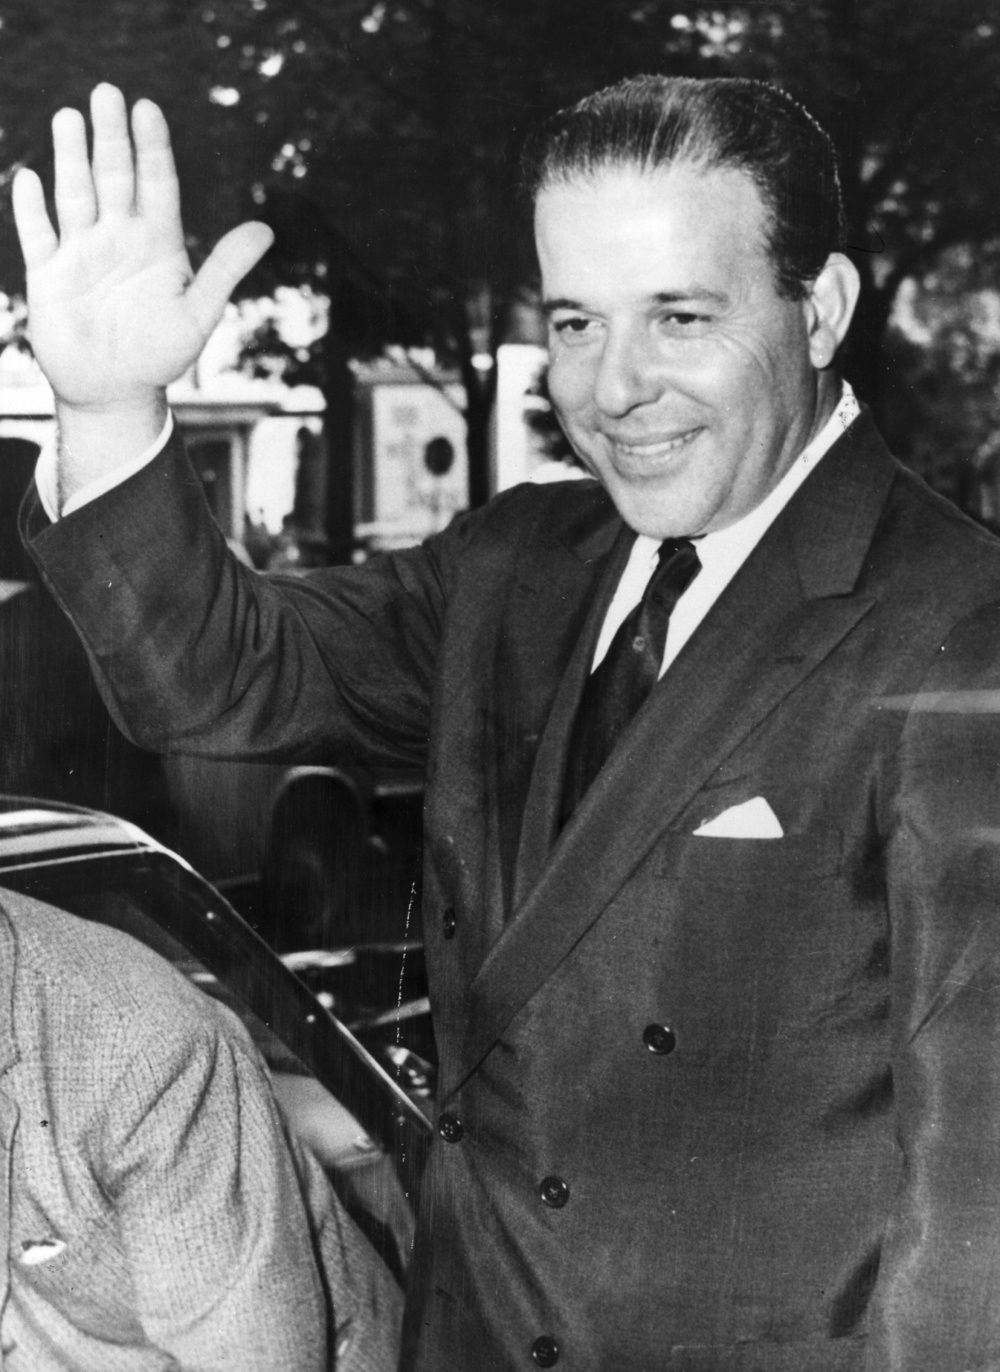 29th August 1962:  Senhor Joao Goulart, the vice-president of Brazil, having travelled from Singapore and believed to be en route for London. This follows the resignation of Brazil